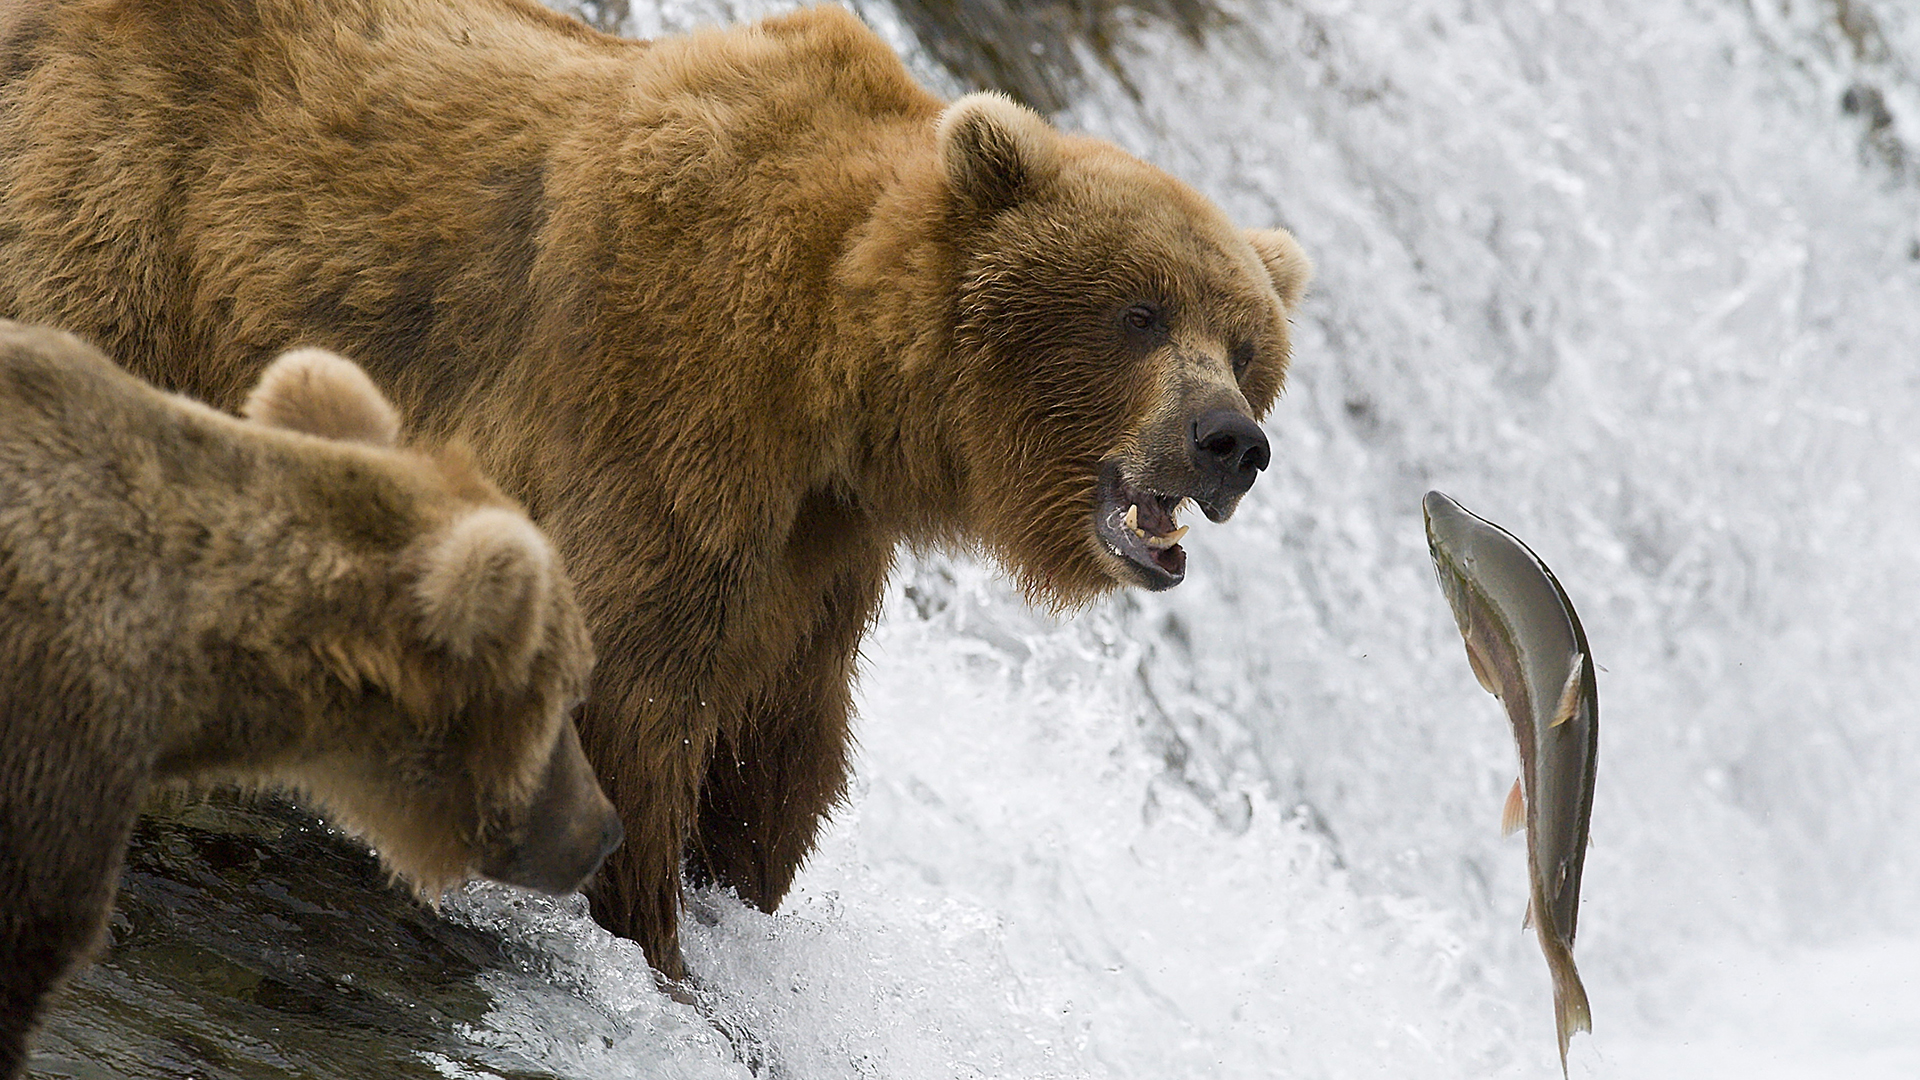 An Alaskan Brown Bear is about to catch a Salmon for lunch